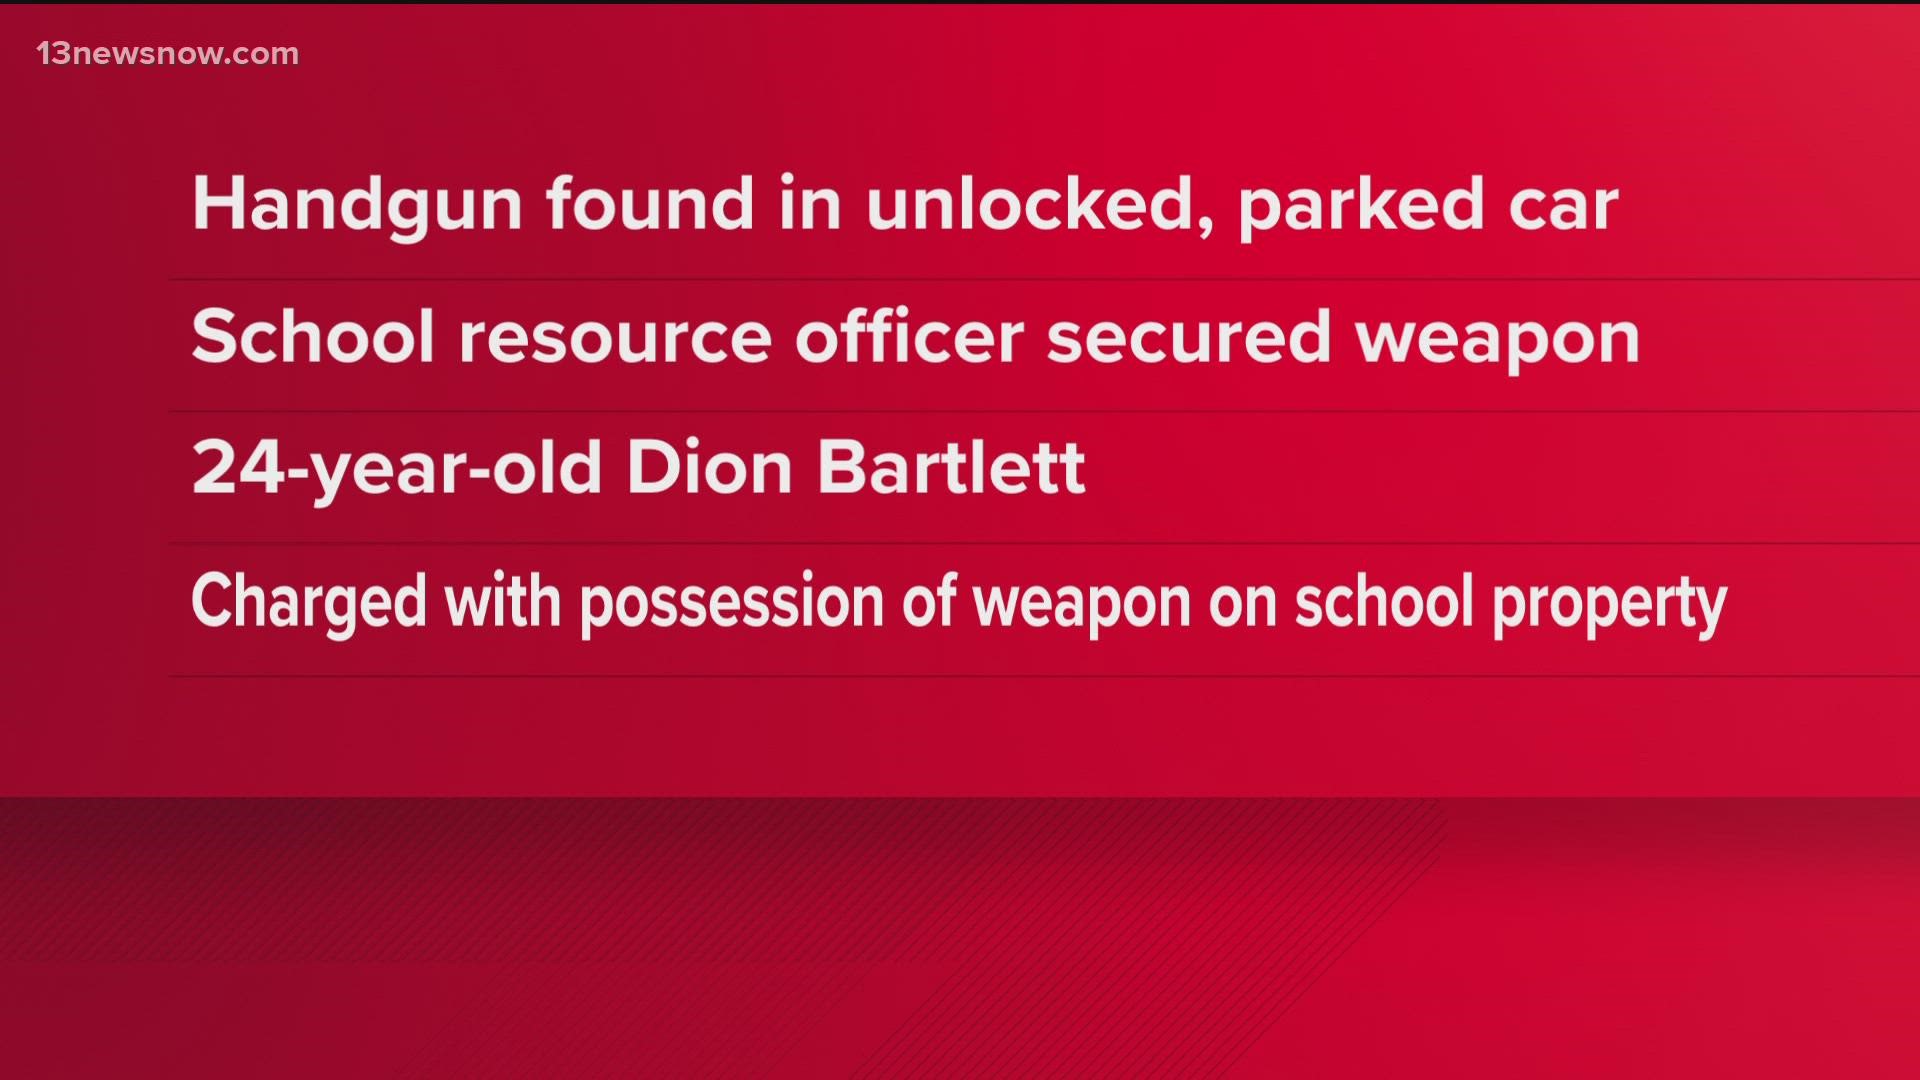 Dion Bartlett Jr., 24, was charged with possession of a weapon on school property.